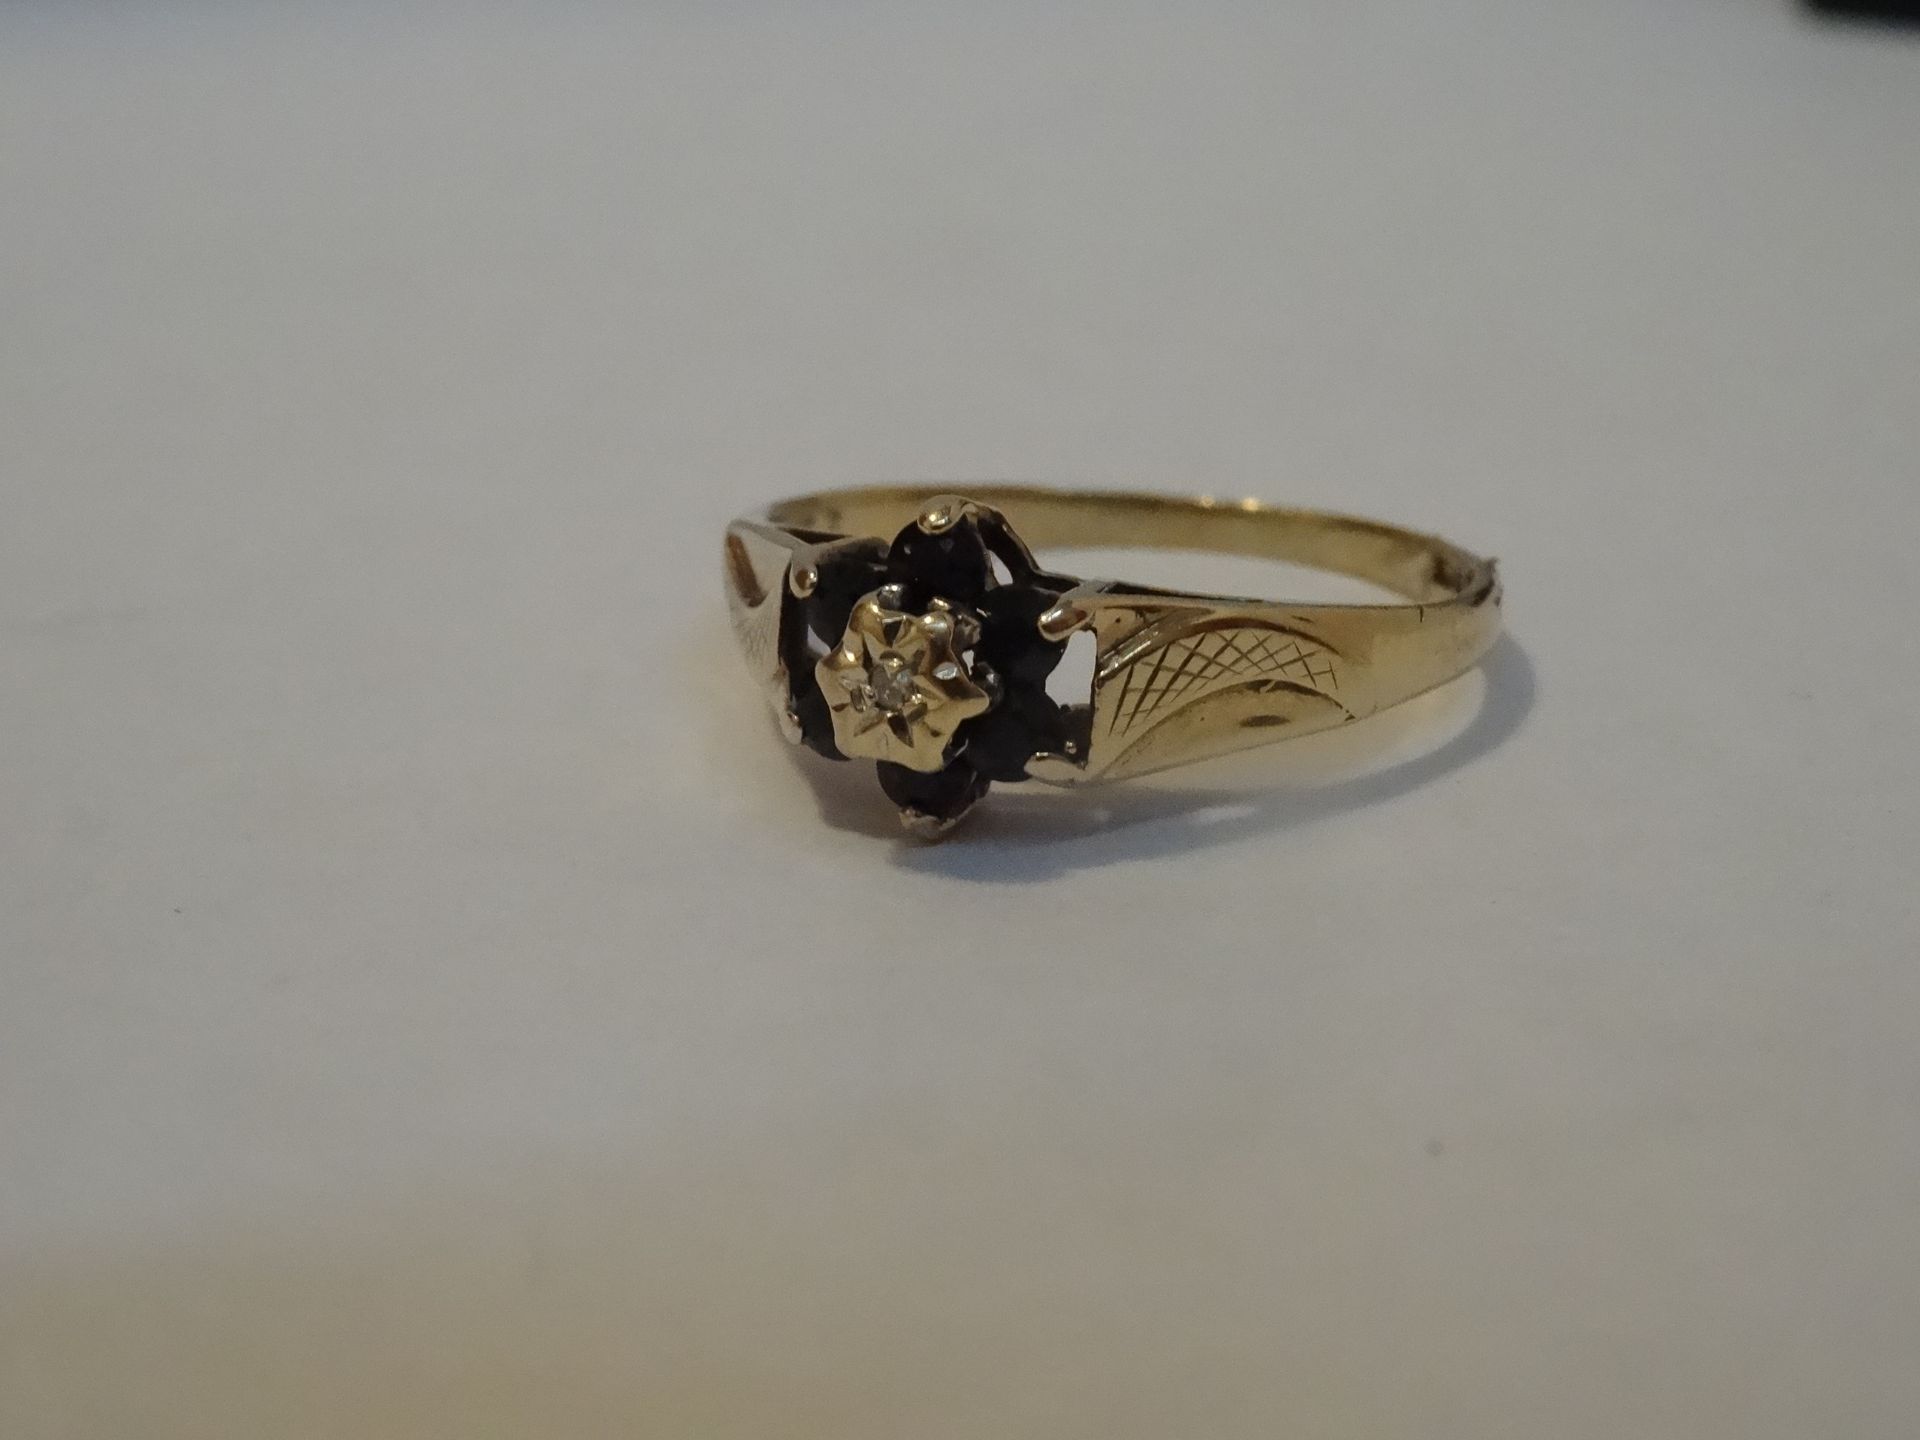 9 Carat Yellow Gold 7 Stone Diamond & Black Unchecked Stone Ring. Total Piece Weight 1.51 Grams